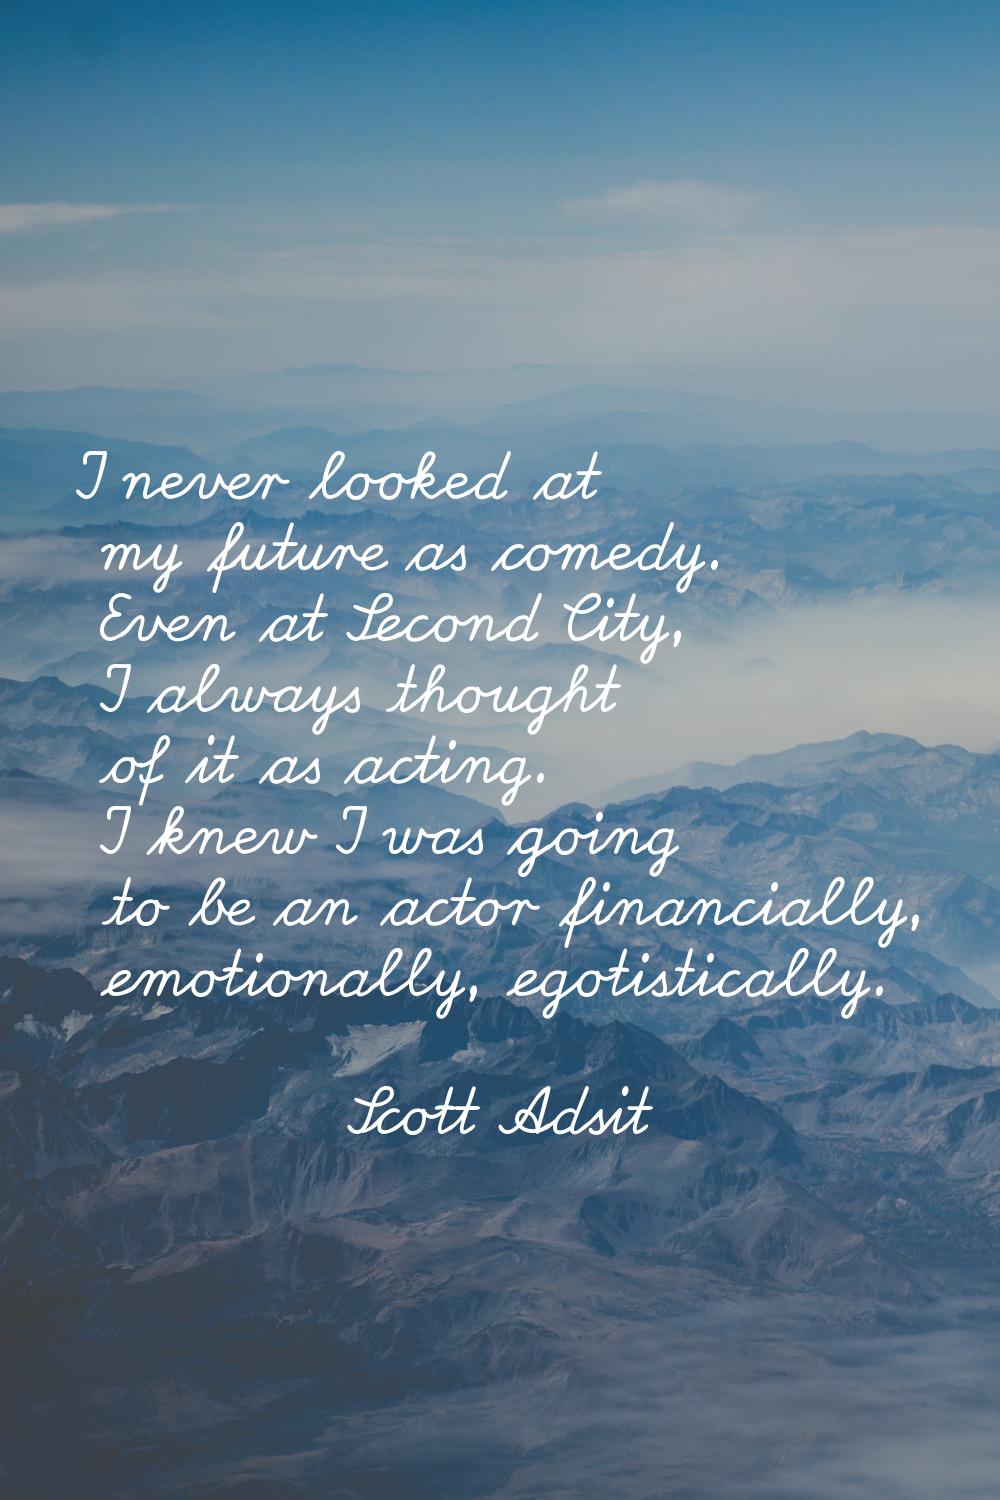 I never looked at my future as comedy. Even at Second City, I always thought of it as acting. I kne